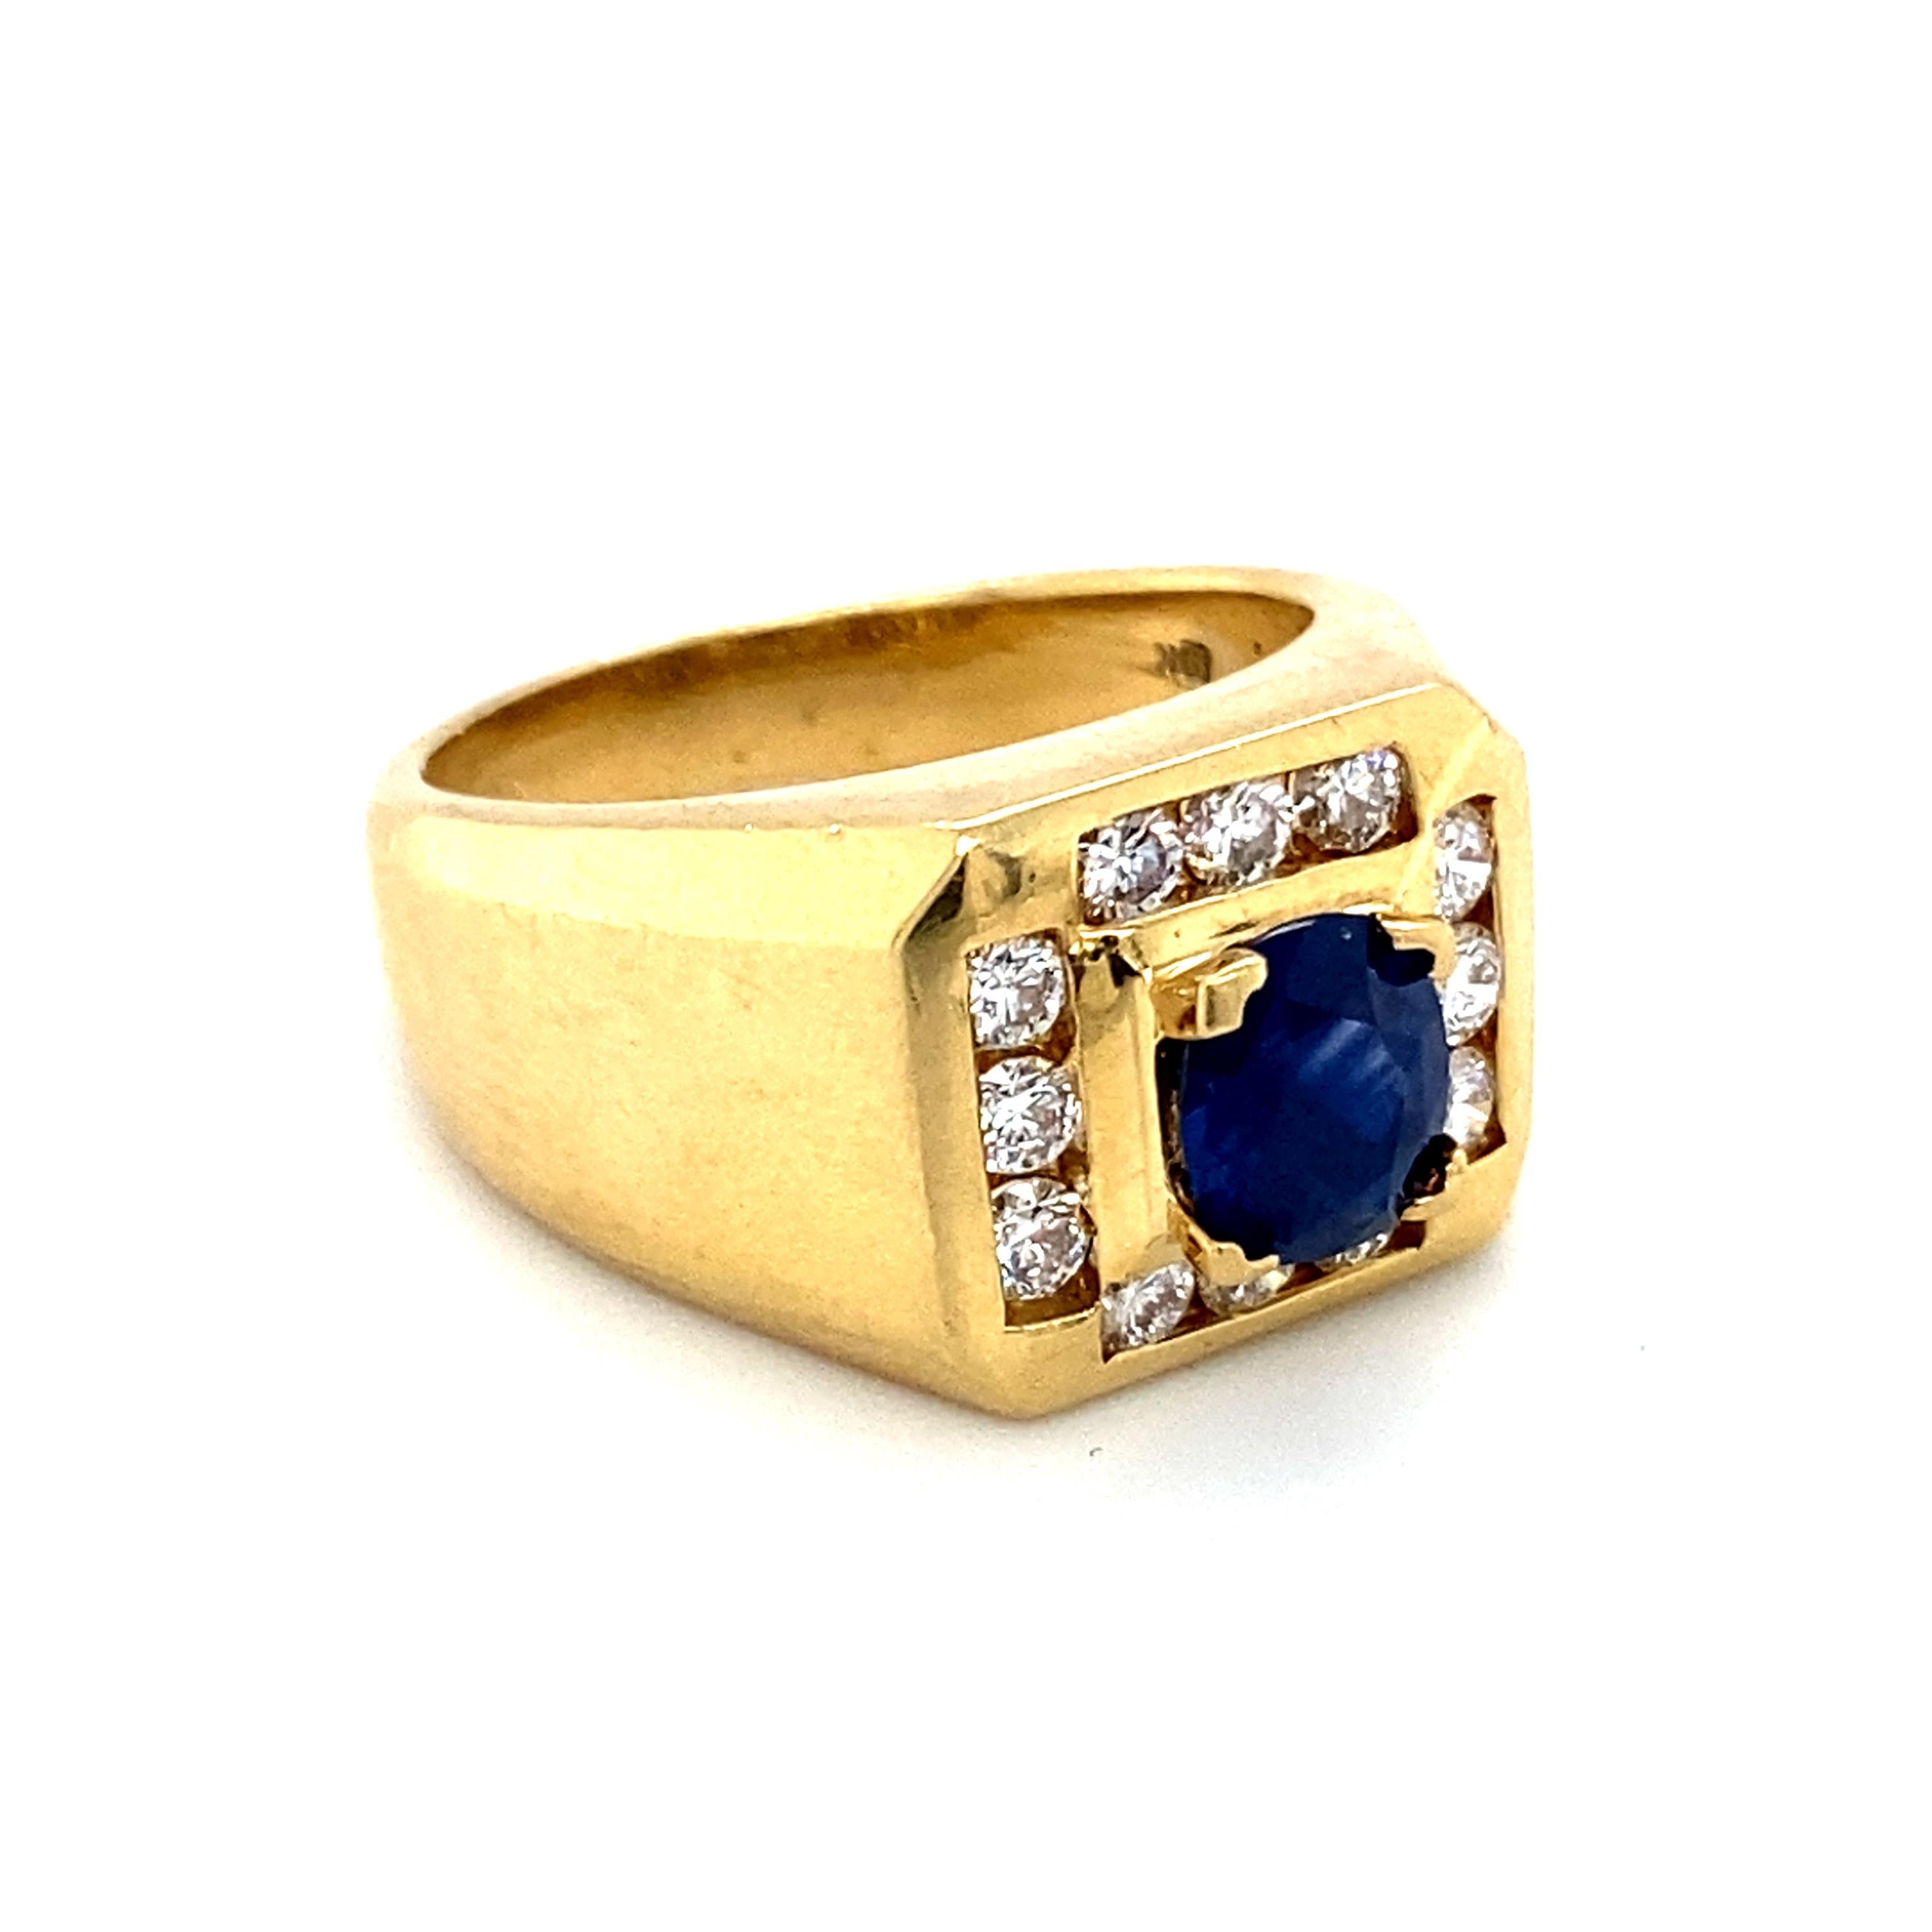 Item Details:
Size: 9.5, can be resized
Metal: 18 Karat Yellow Gold
Weight: 17.4 grams
Finger to top of stone measures 8.5 millimeters

Sapphire Details:
Carat: 1.0 carat total weight
Cut: Oval
Color: Rich Royal Blue

Diamond Details:
Cut: Round